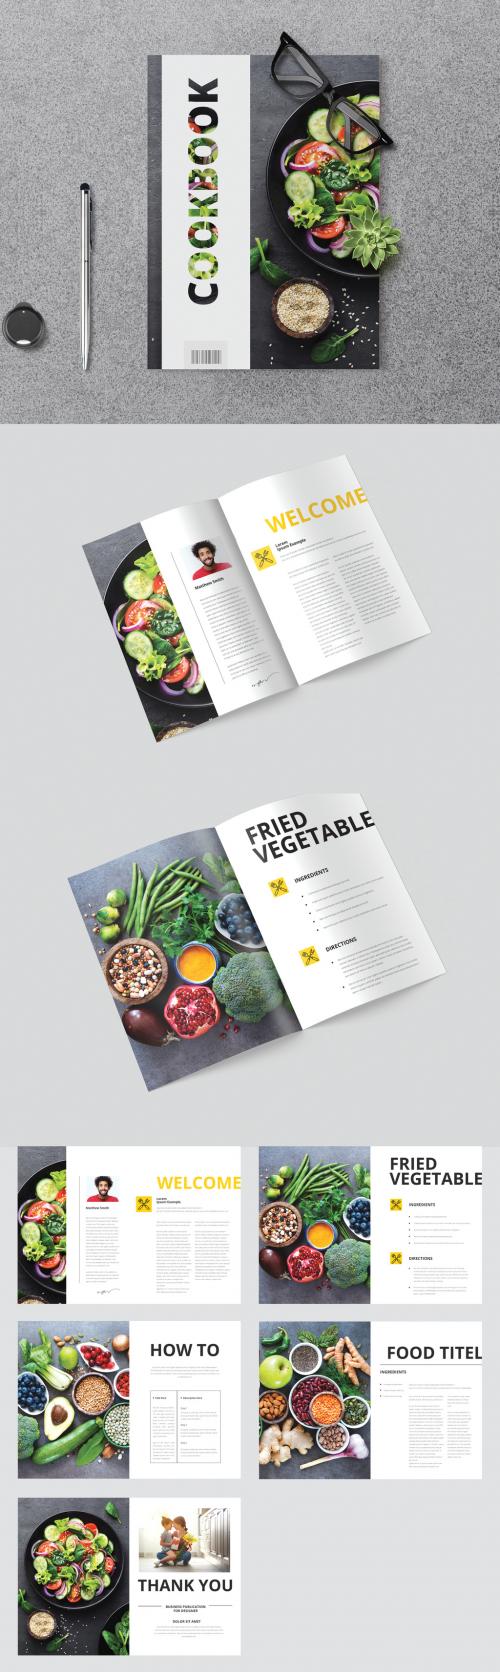 Adobe Stock - Cookbook Layout with Yellow Accents - 374363895